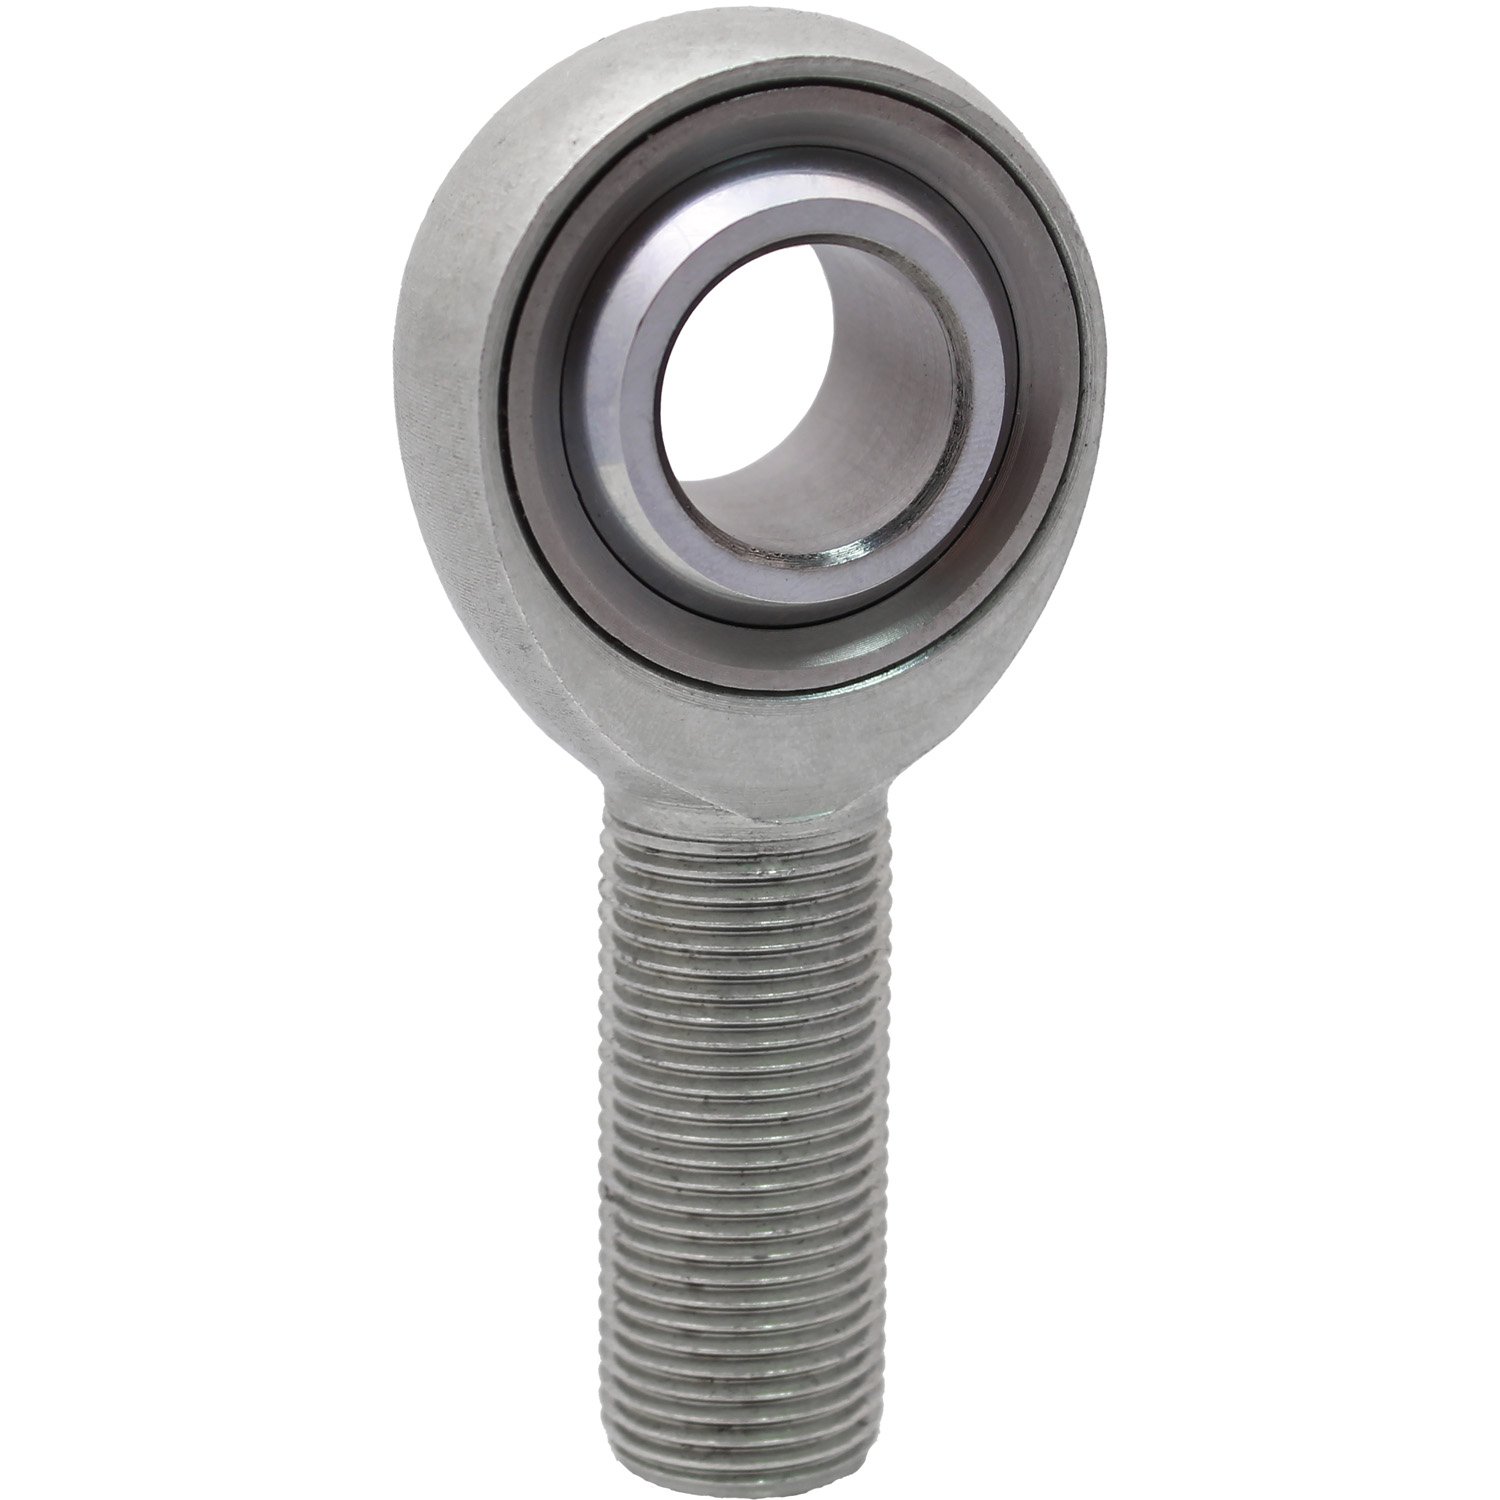 HM Series Rod End Hole I.D.: .625 in.